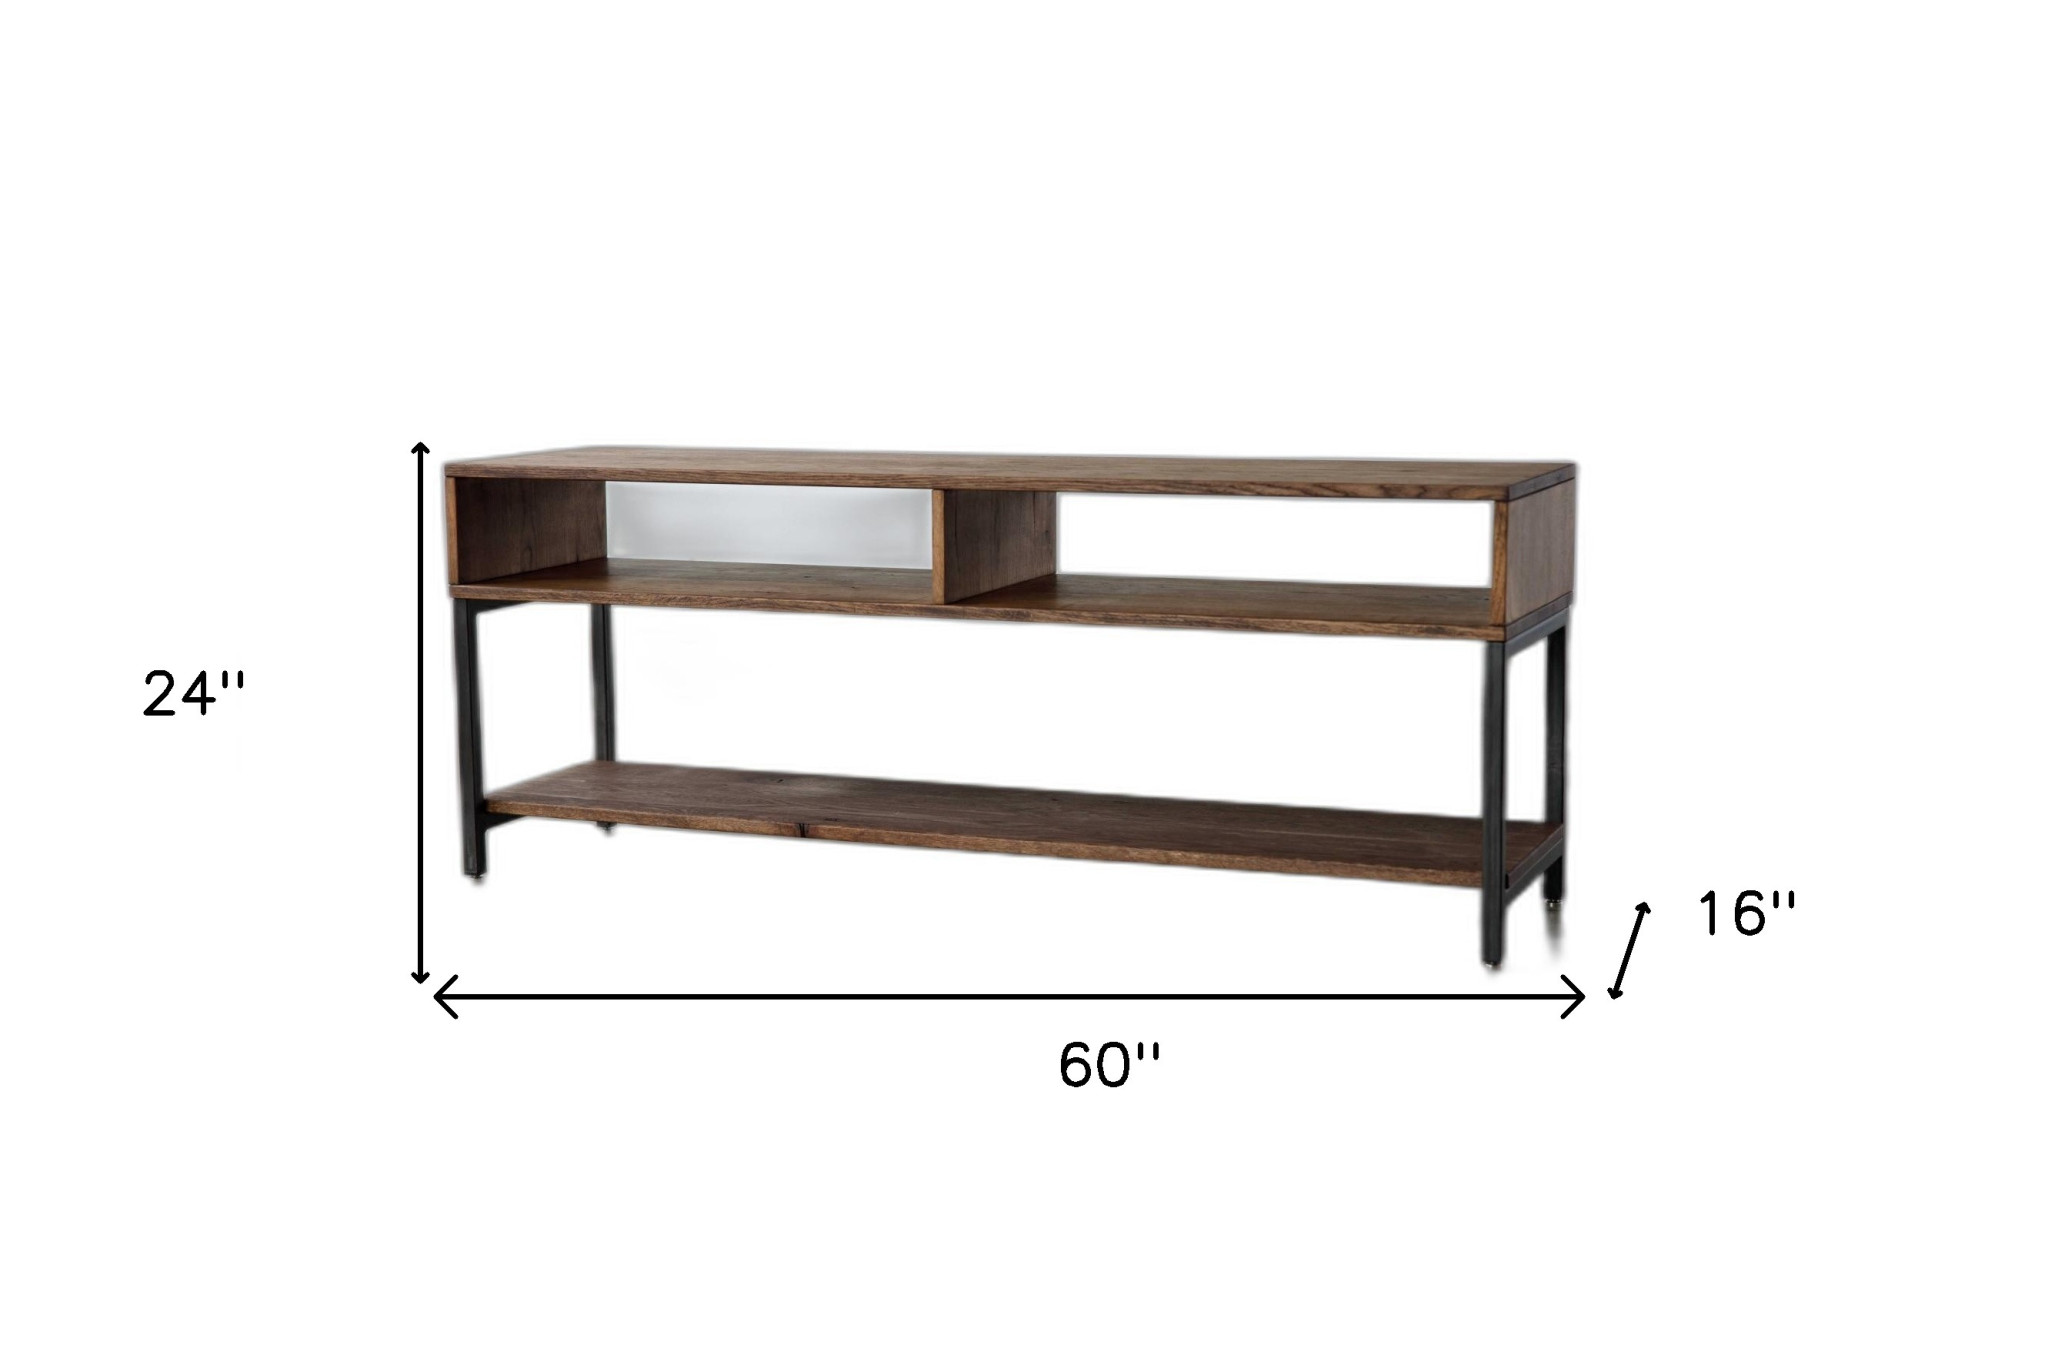 Warm Dark Finish Maple And Steel TV Stand and Media Center